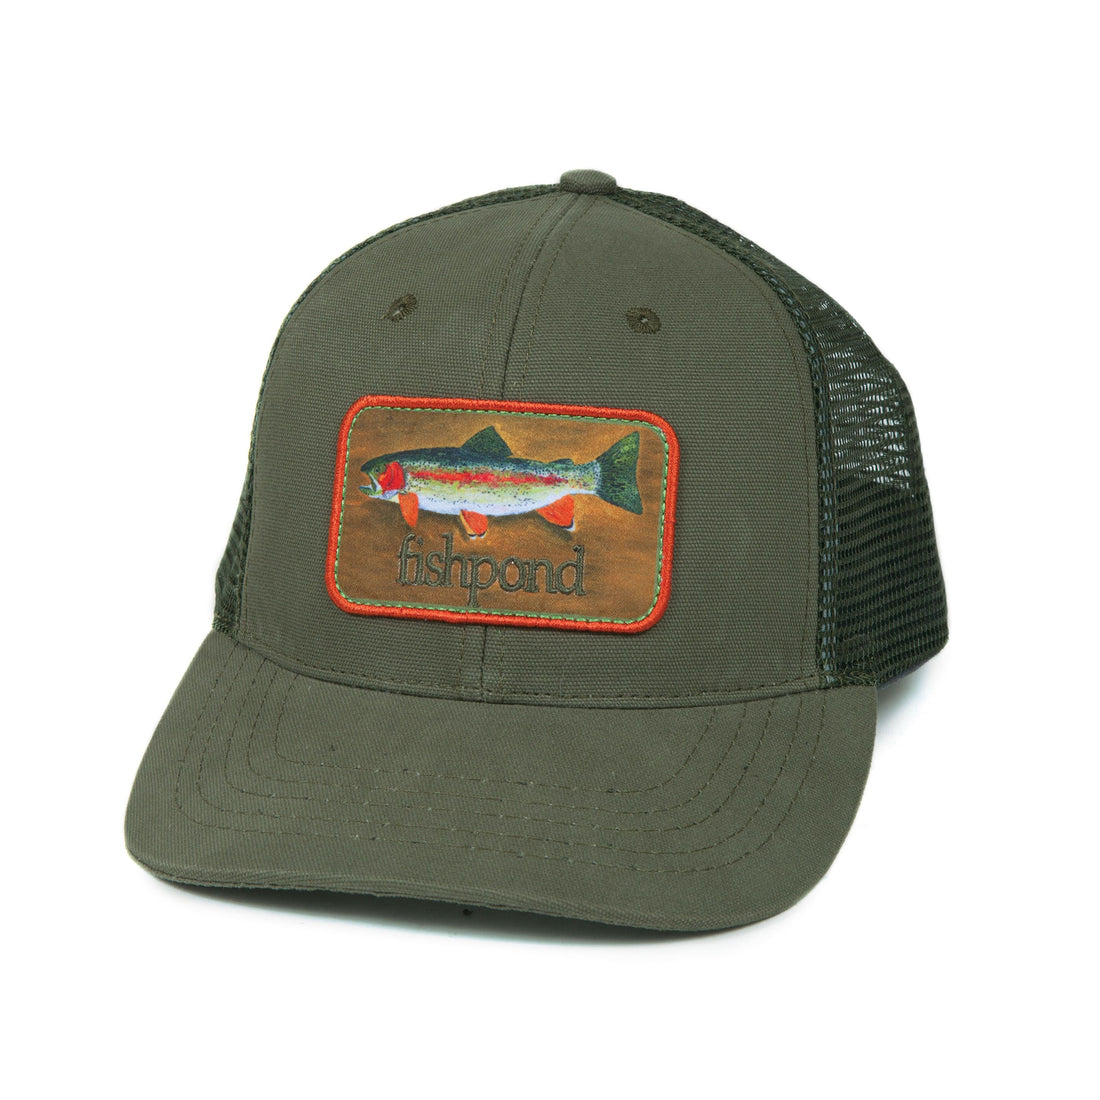 Fishpond - Rainbow Trout Hat - Olive